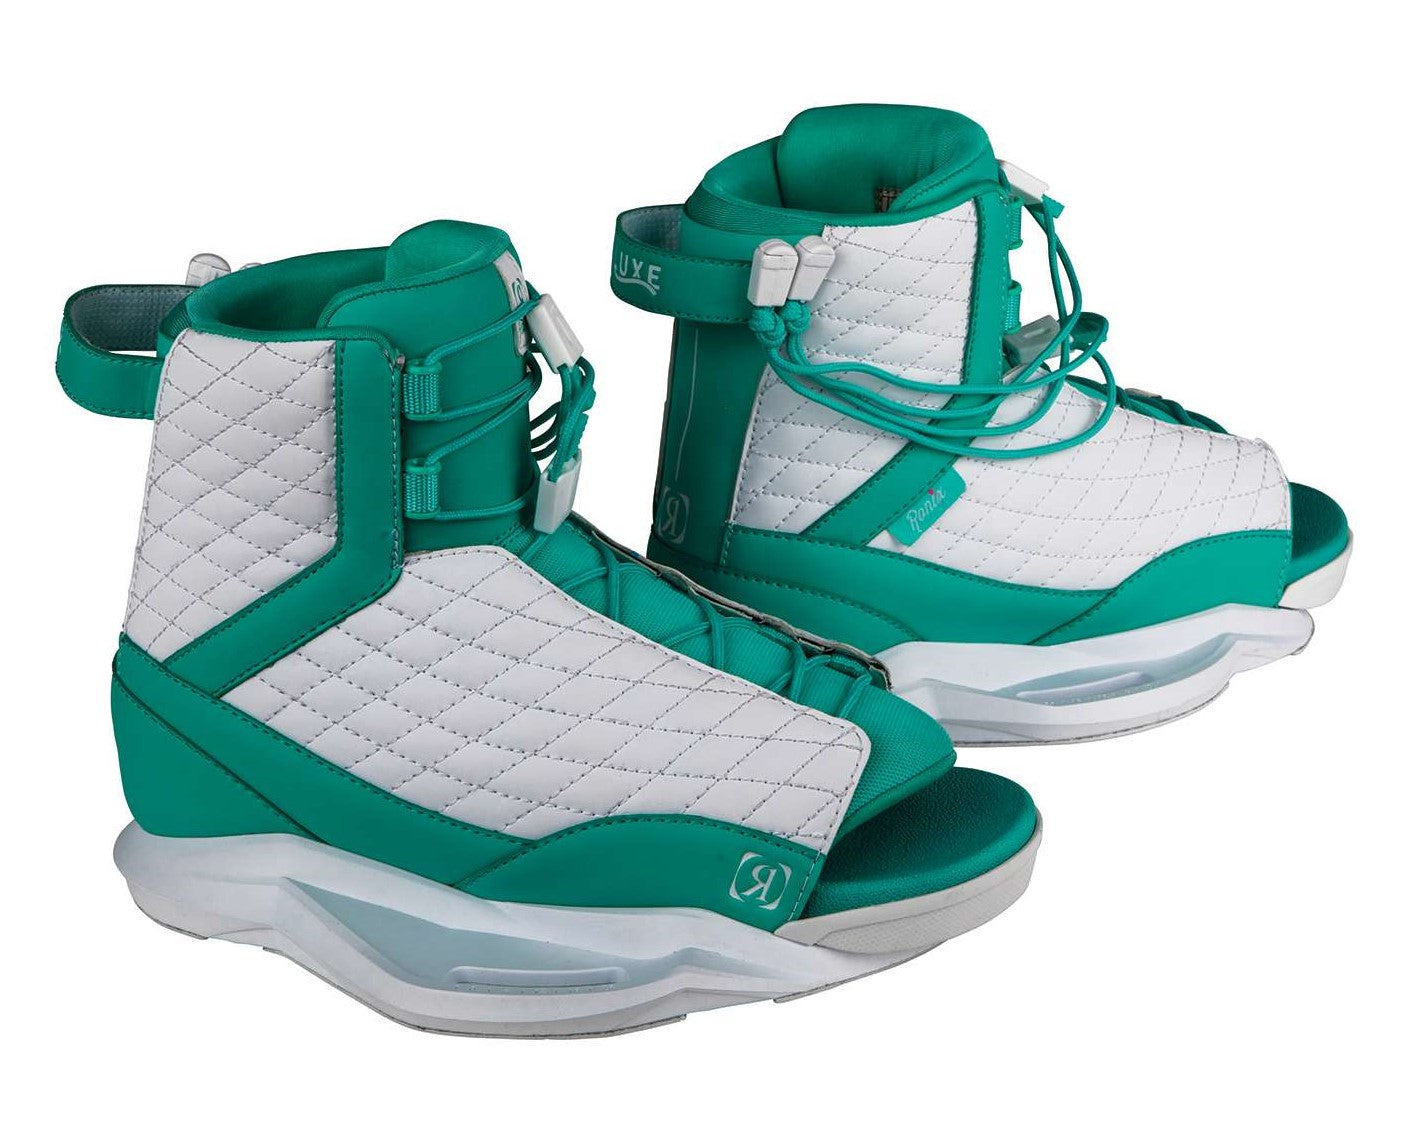 2019 Ronix Luxe Boot White/Turquoise - 6-8.5